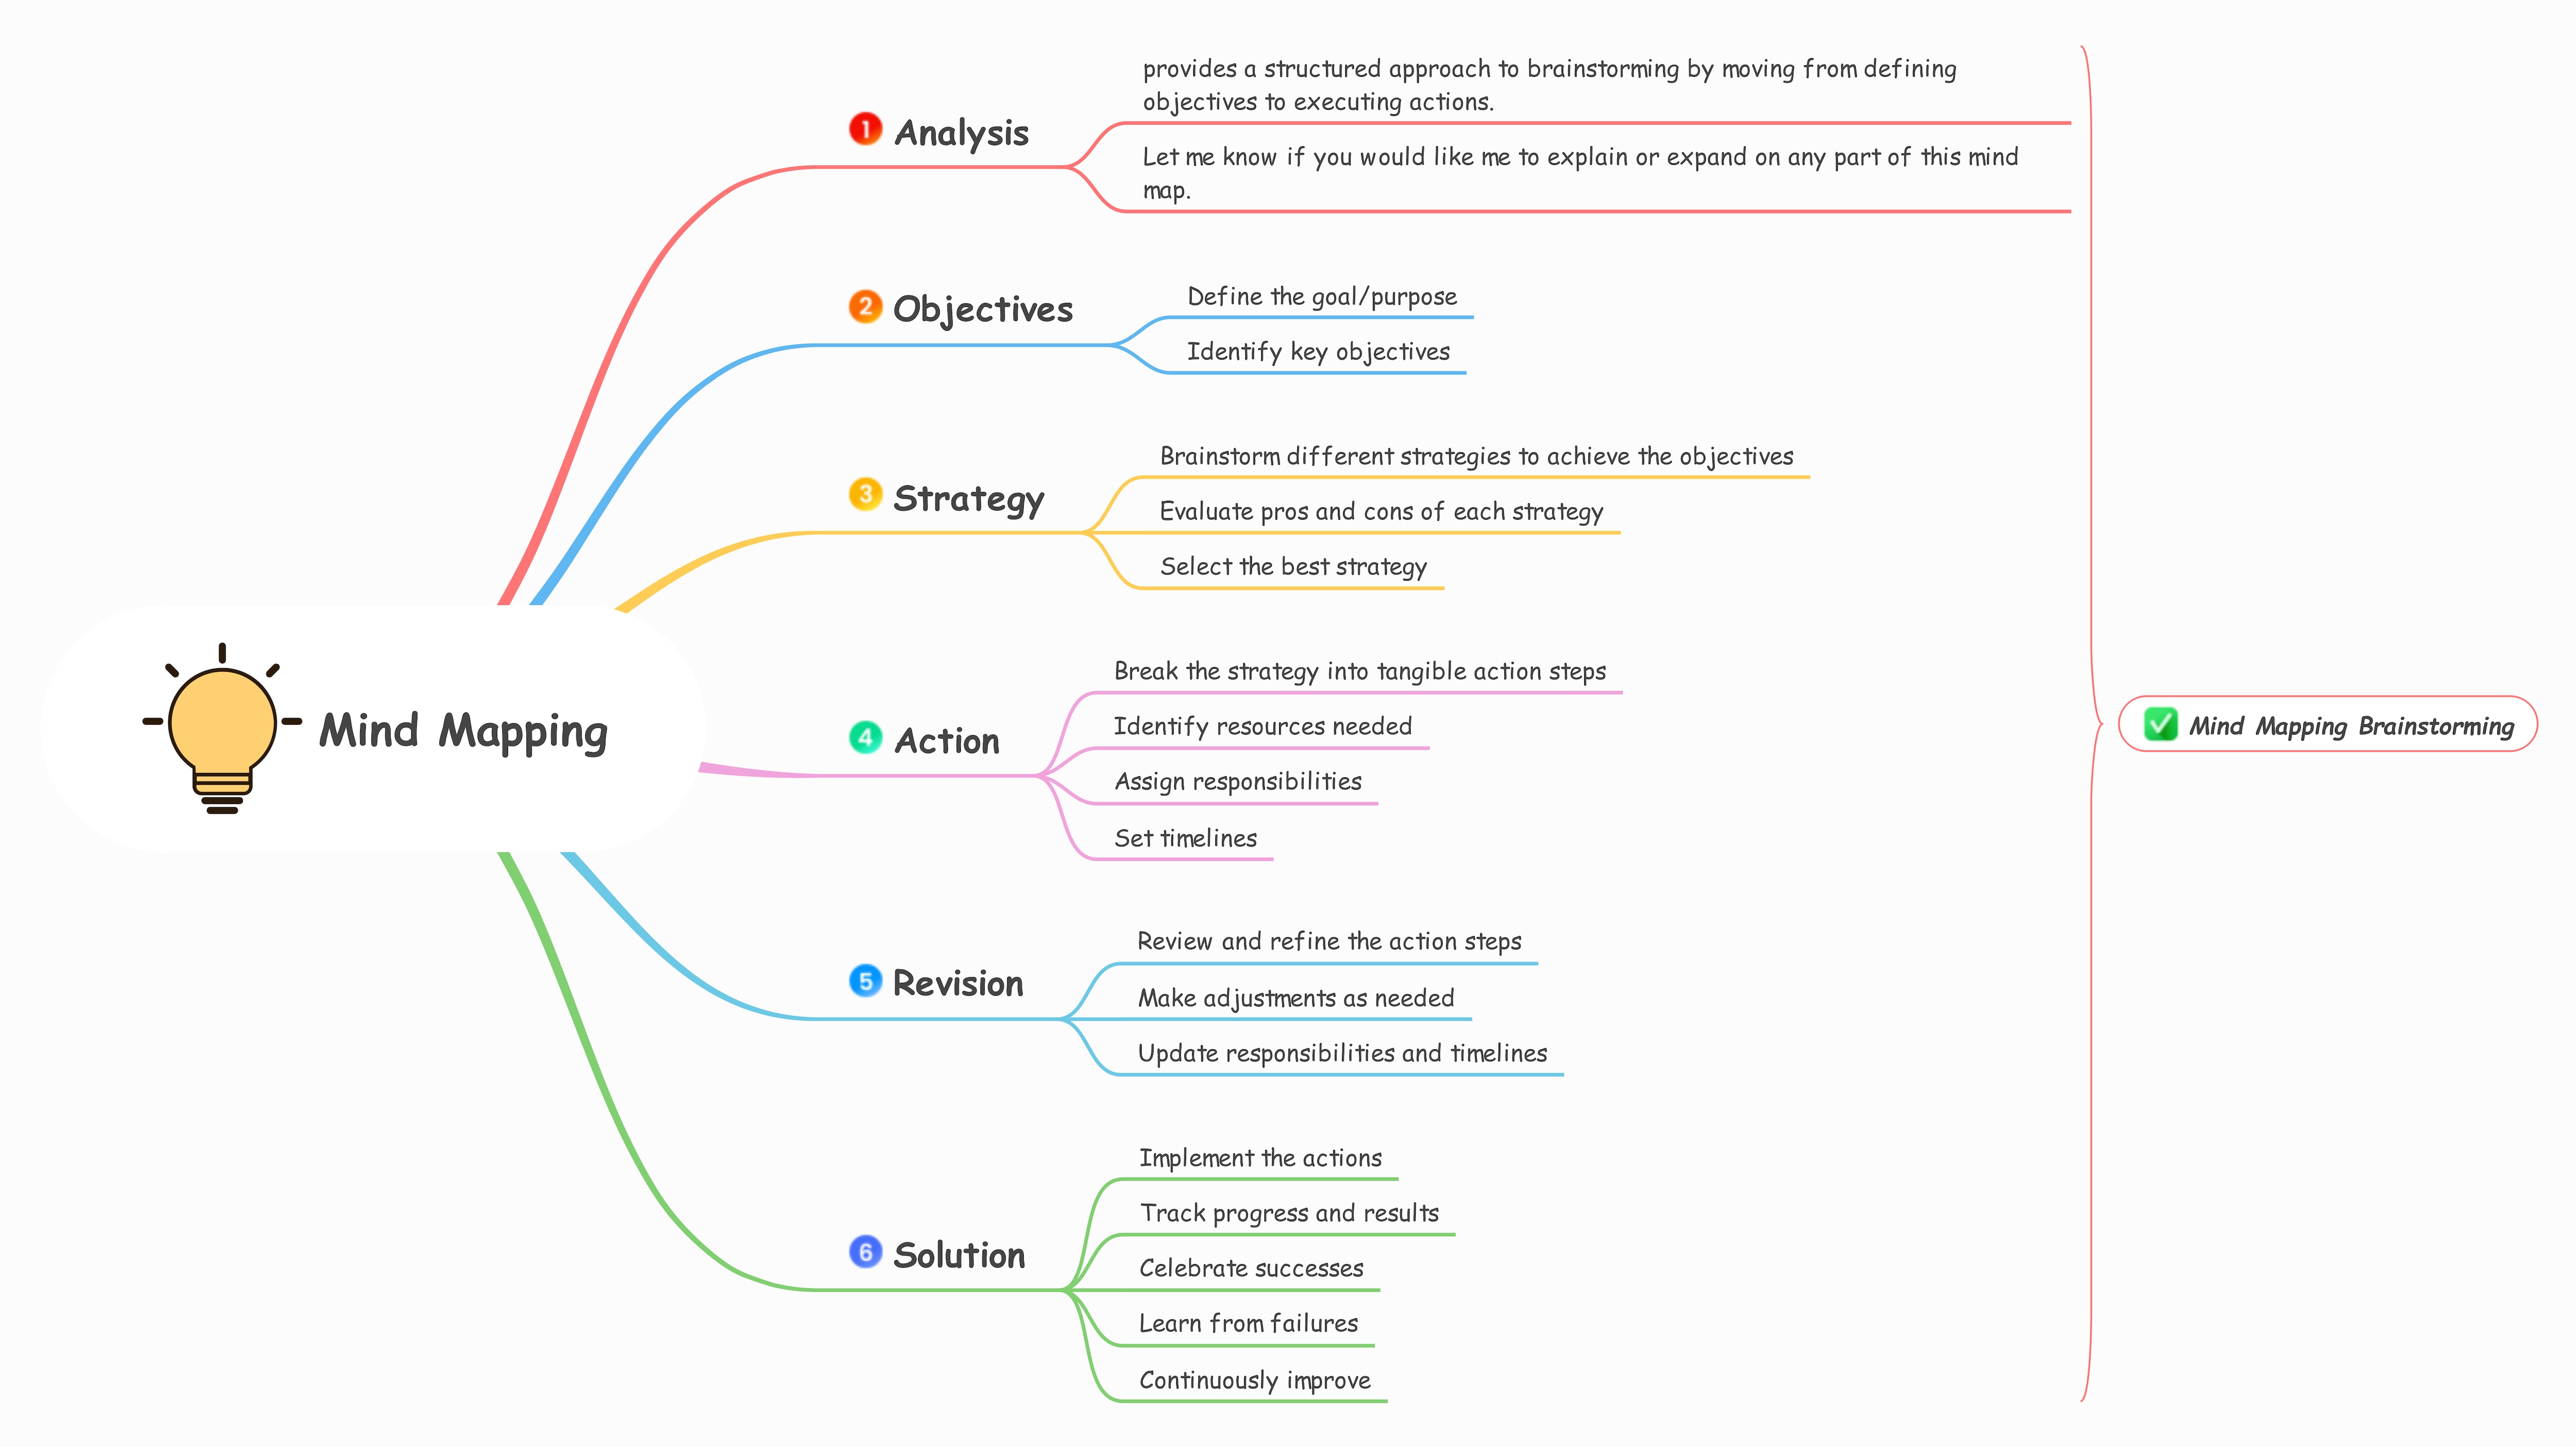 Mind Mapping Brainstorming